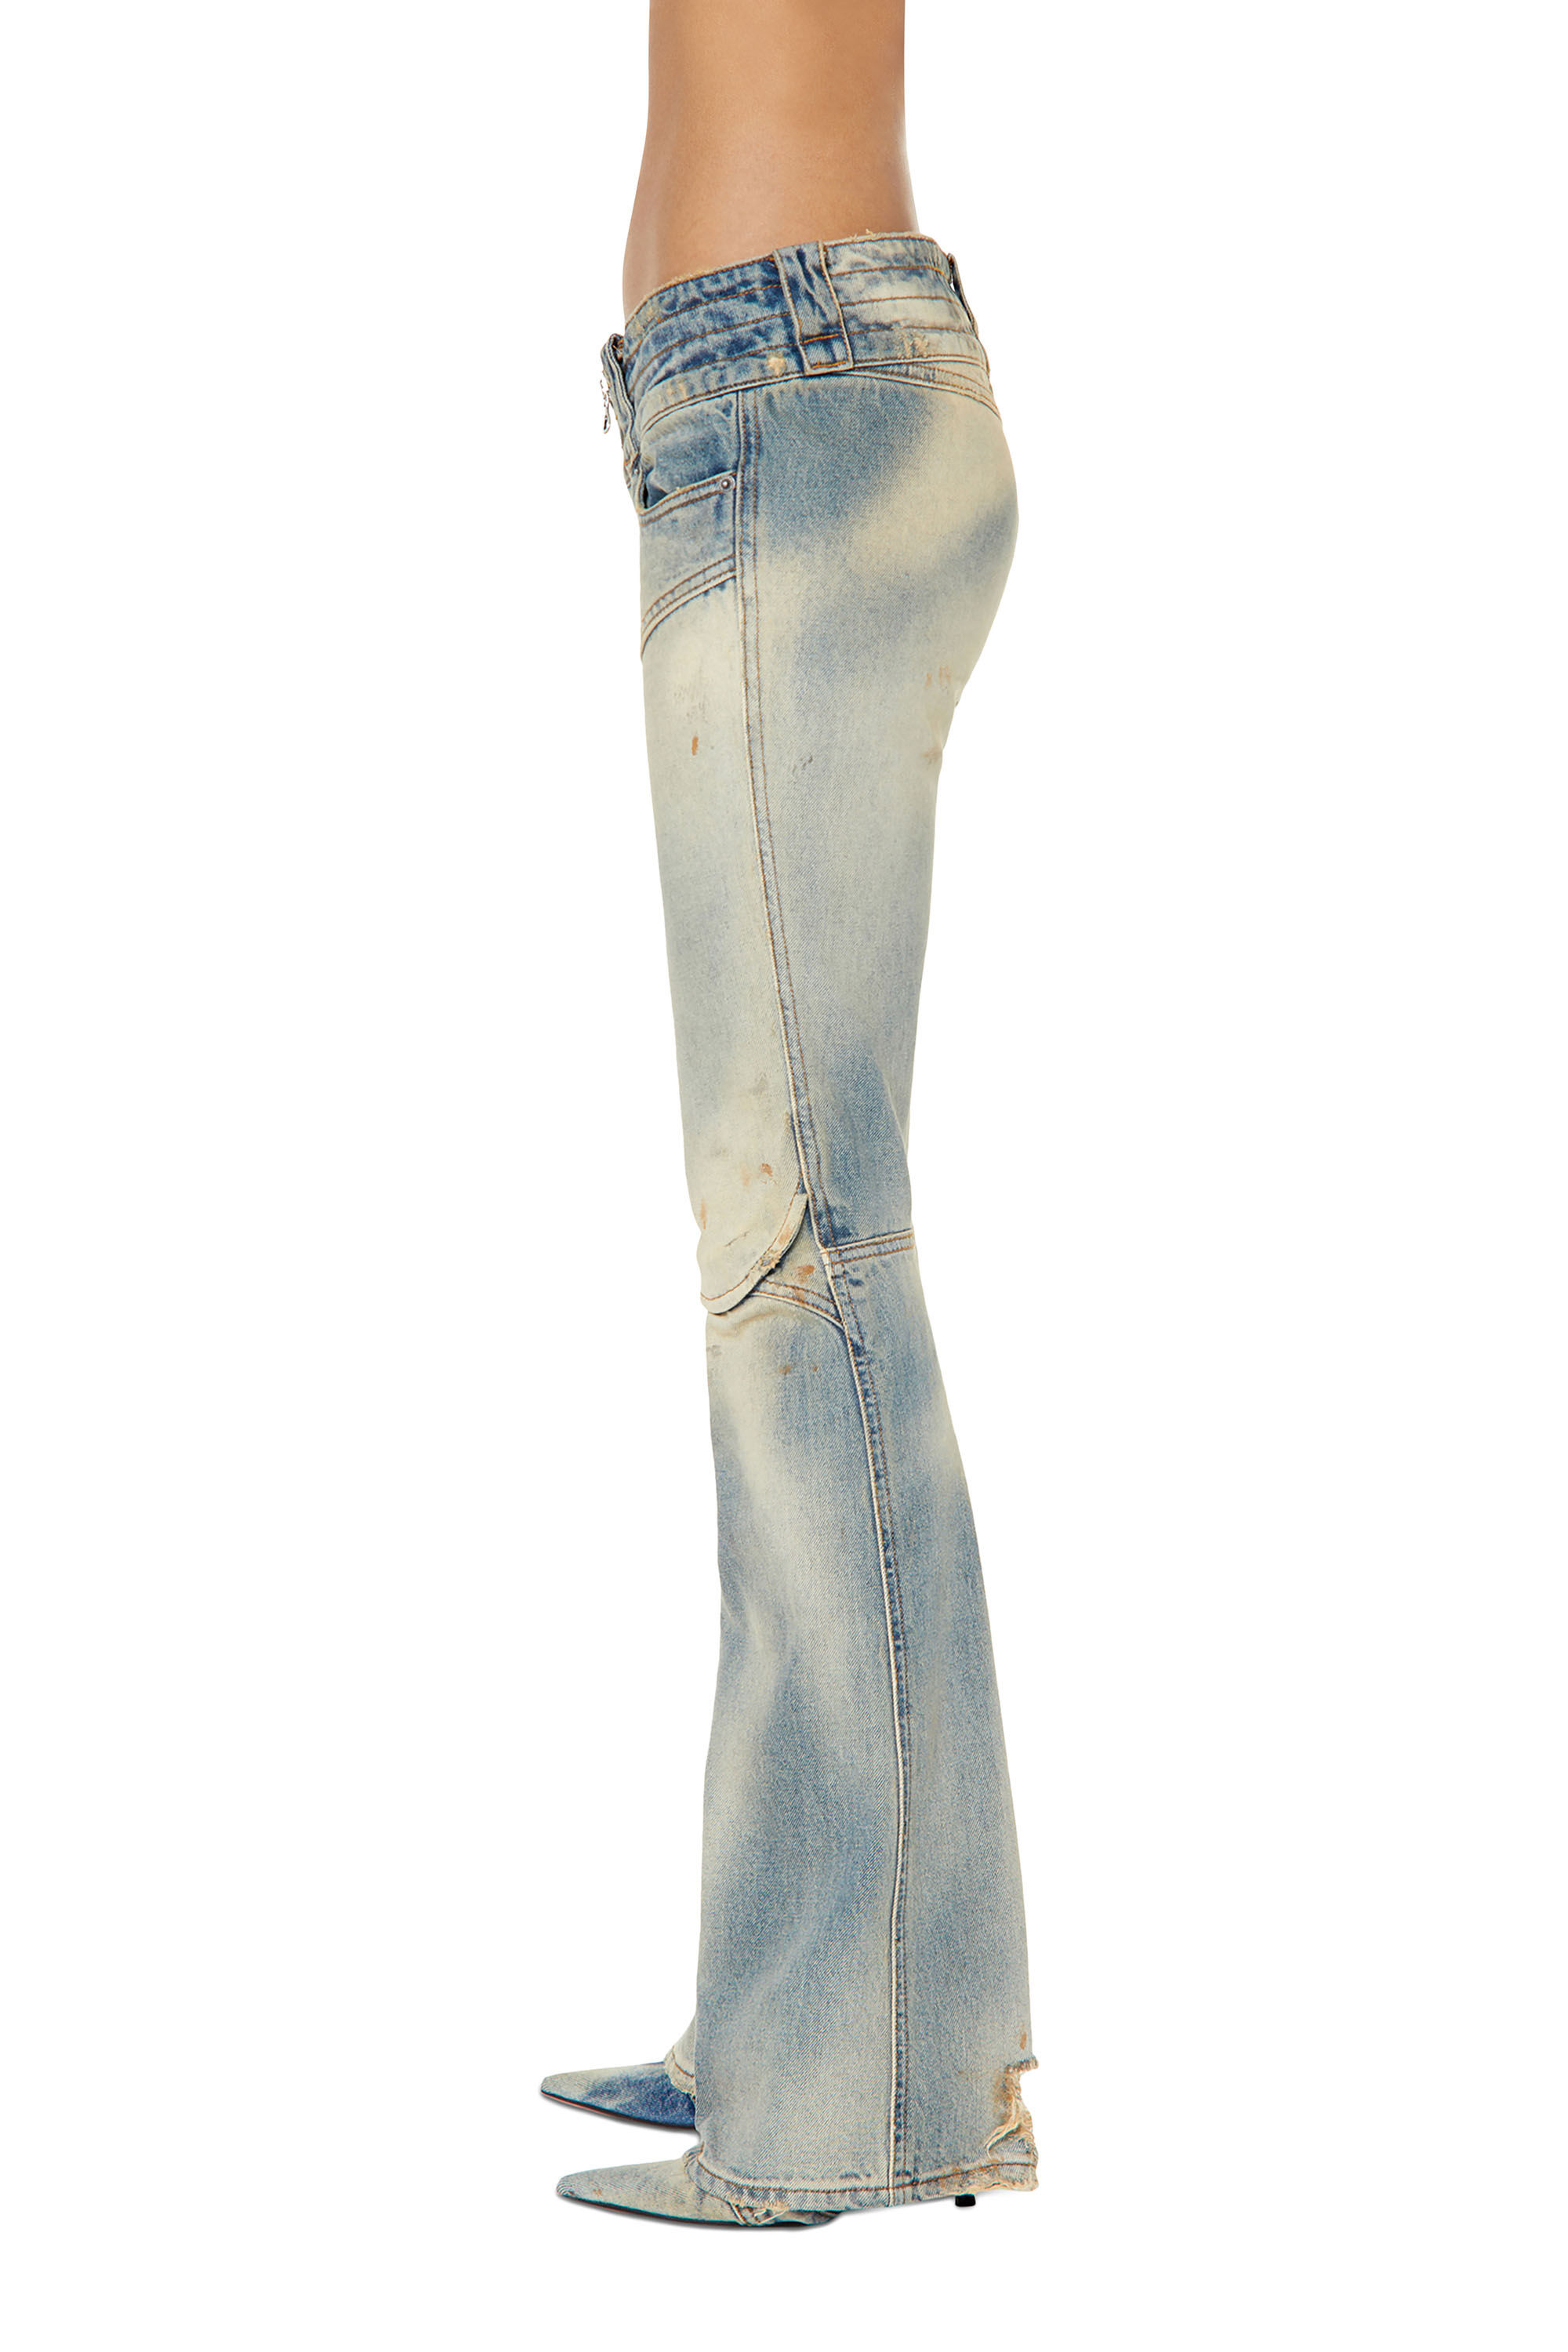 Belthy 0ENAF Woman: Bootcut and Flare Medium blue Jeans